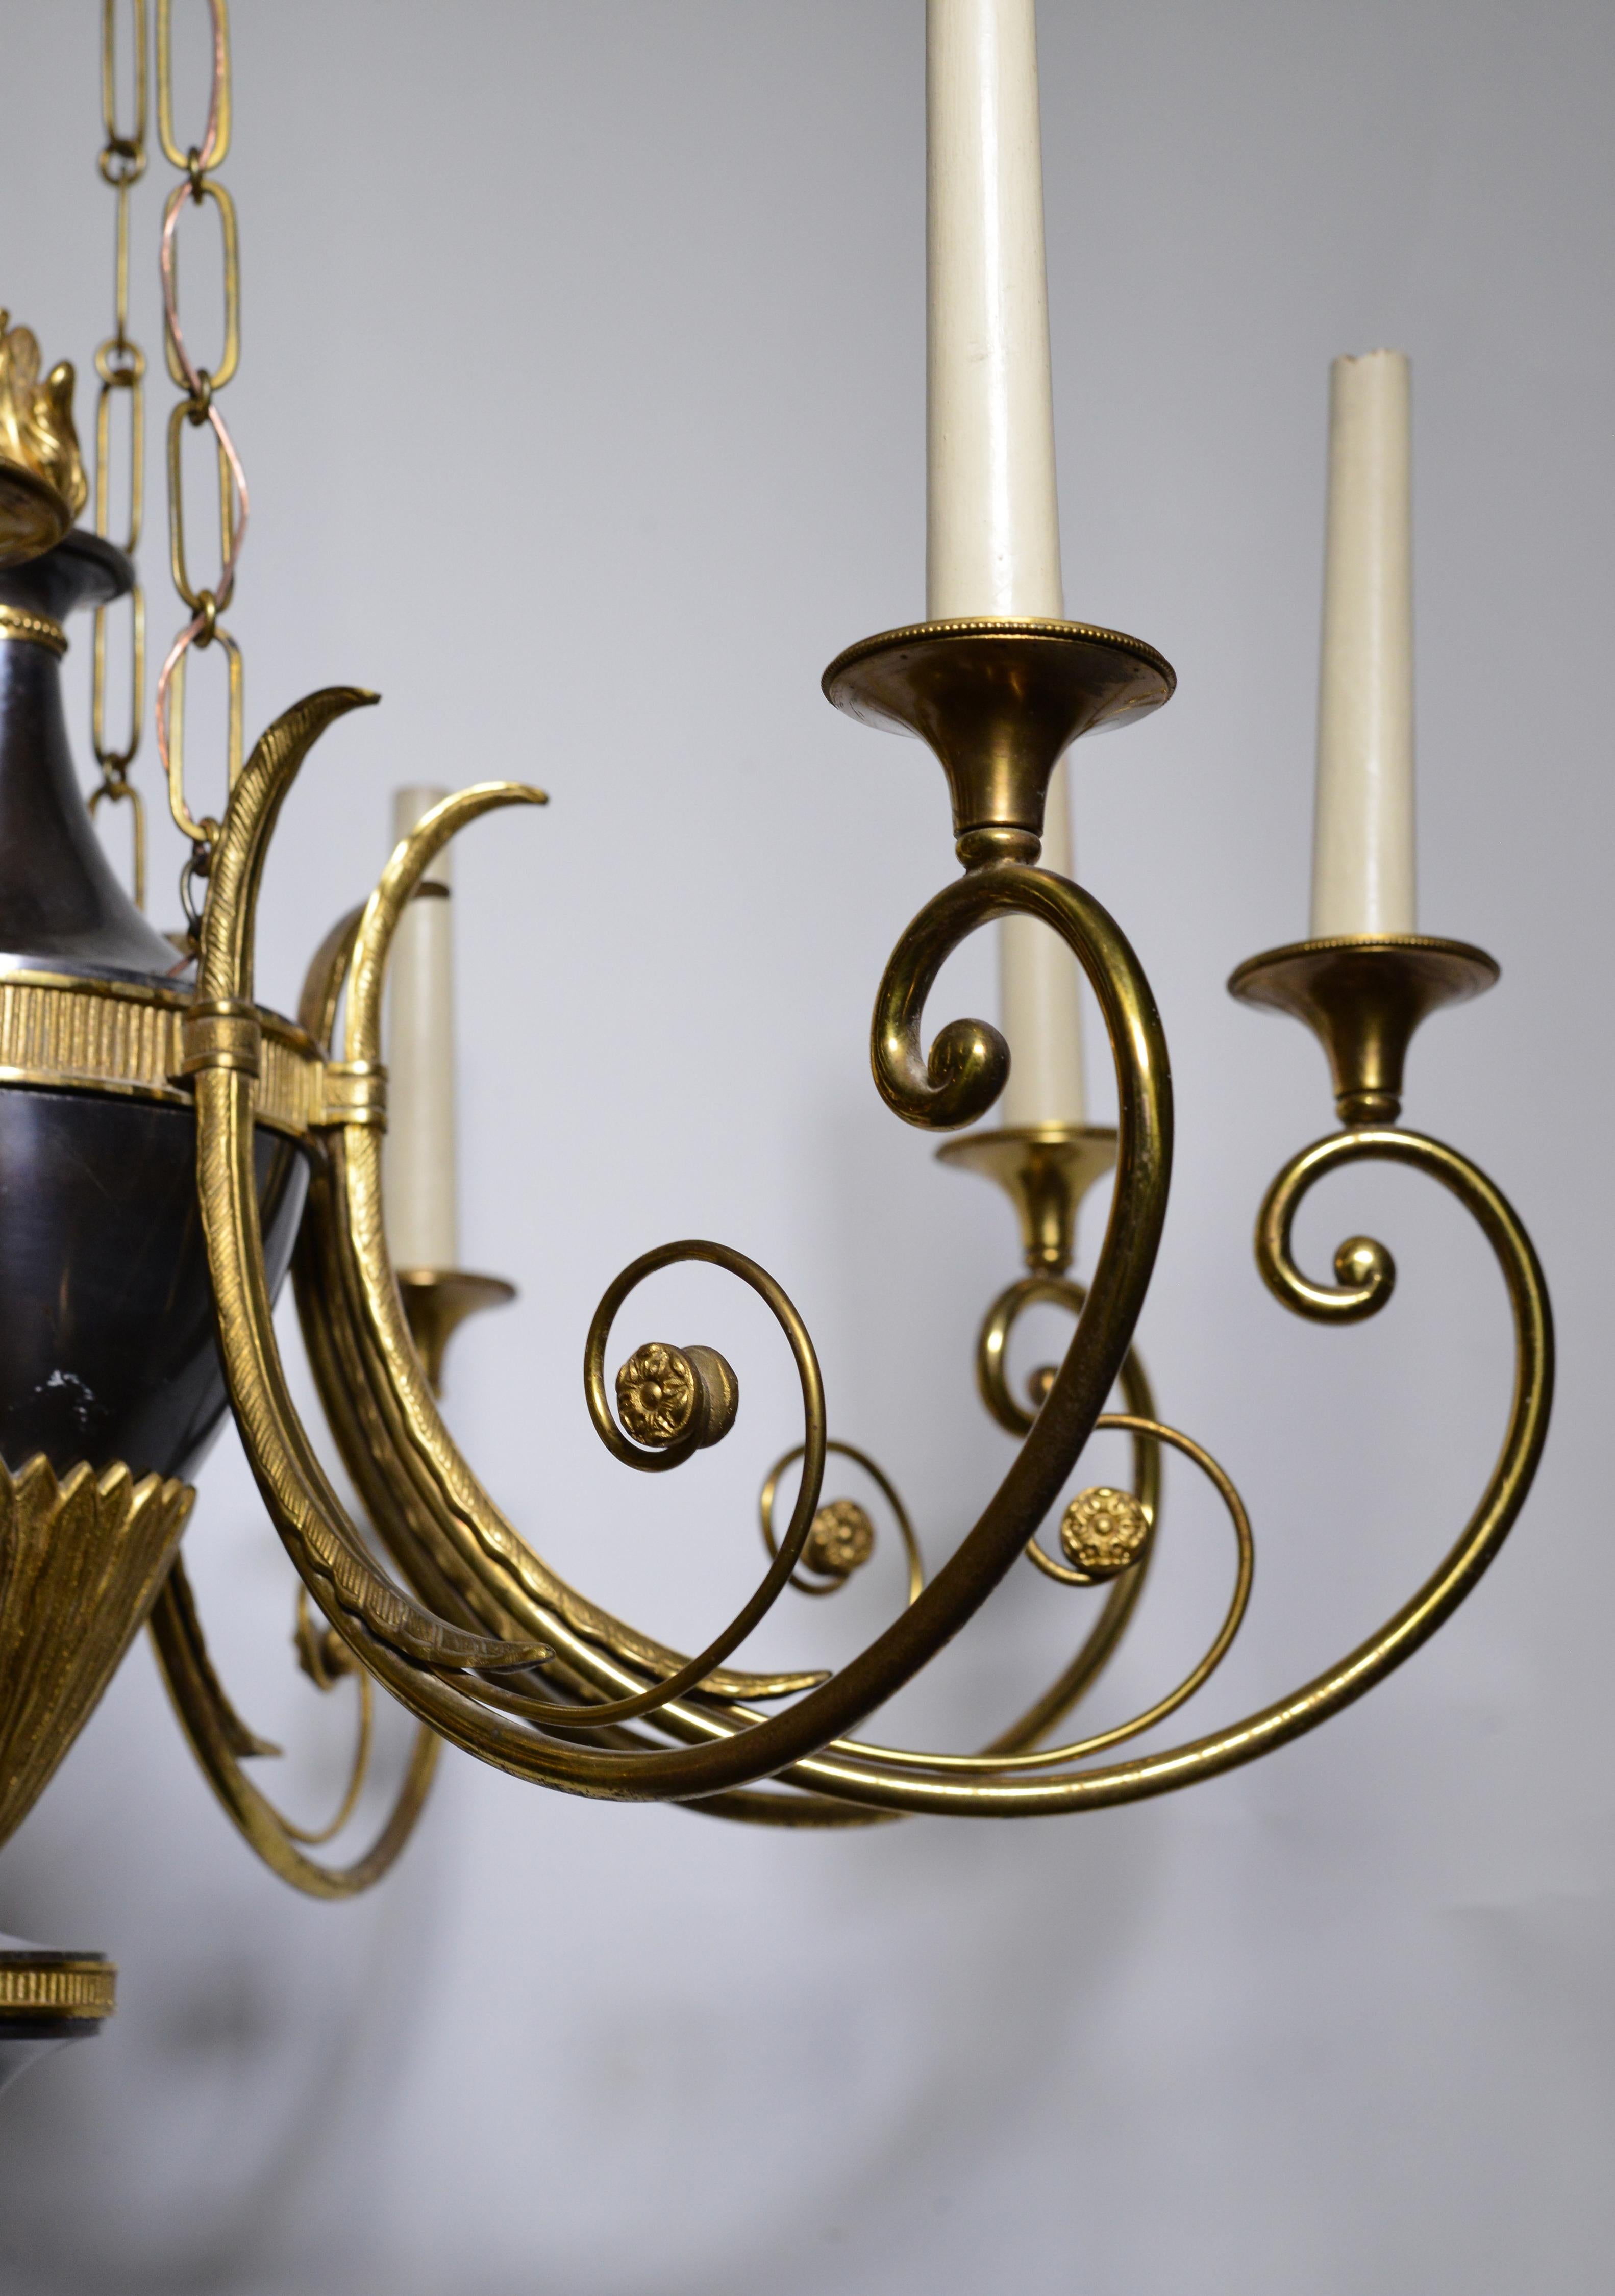 Empire Antique Chandelier Gilt Bronze and Oxidized 9 light early 20th century For Sale 1